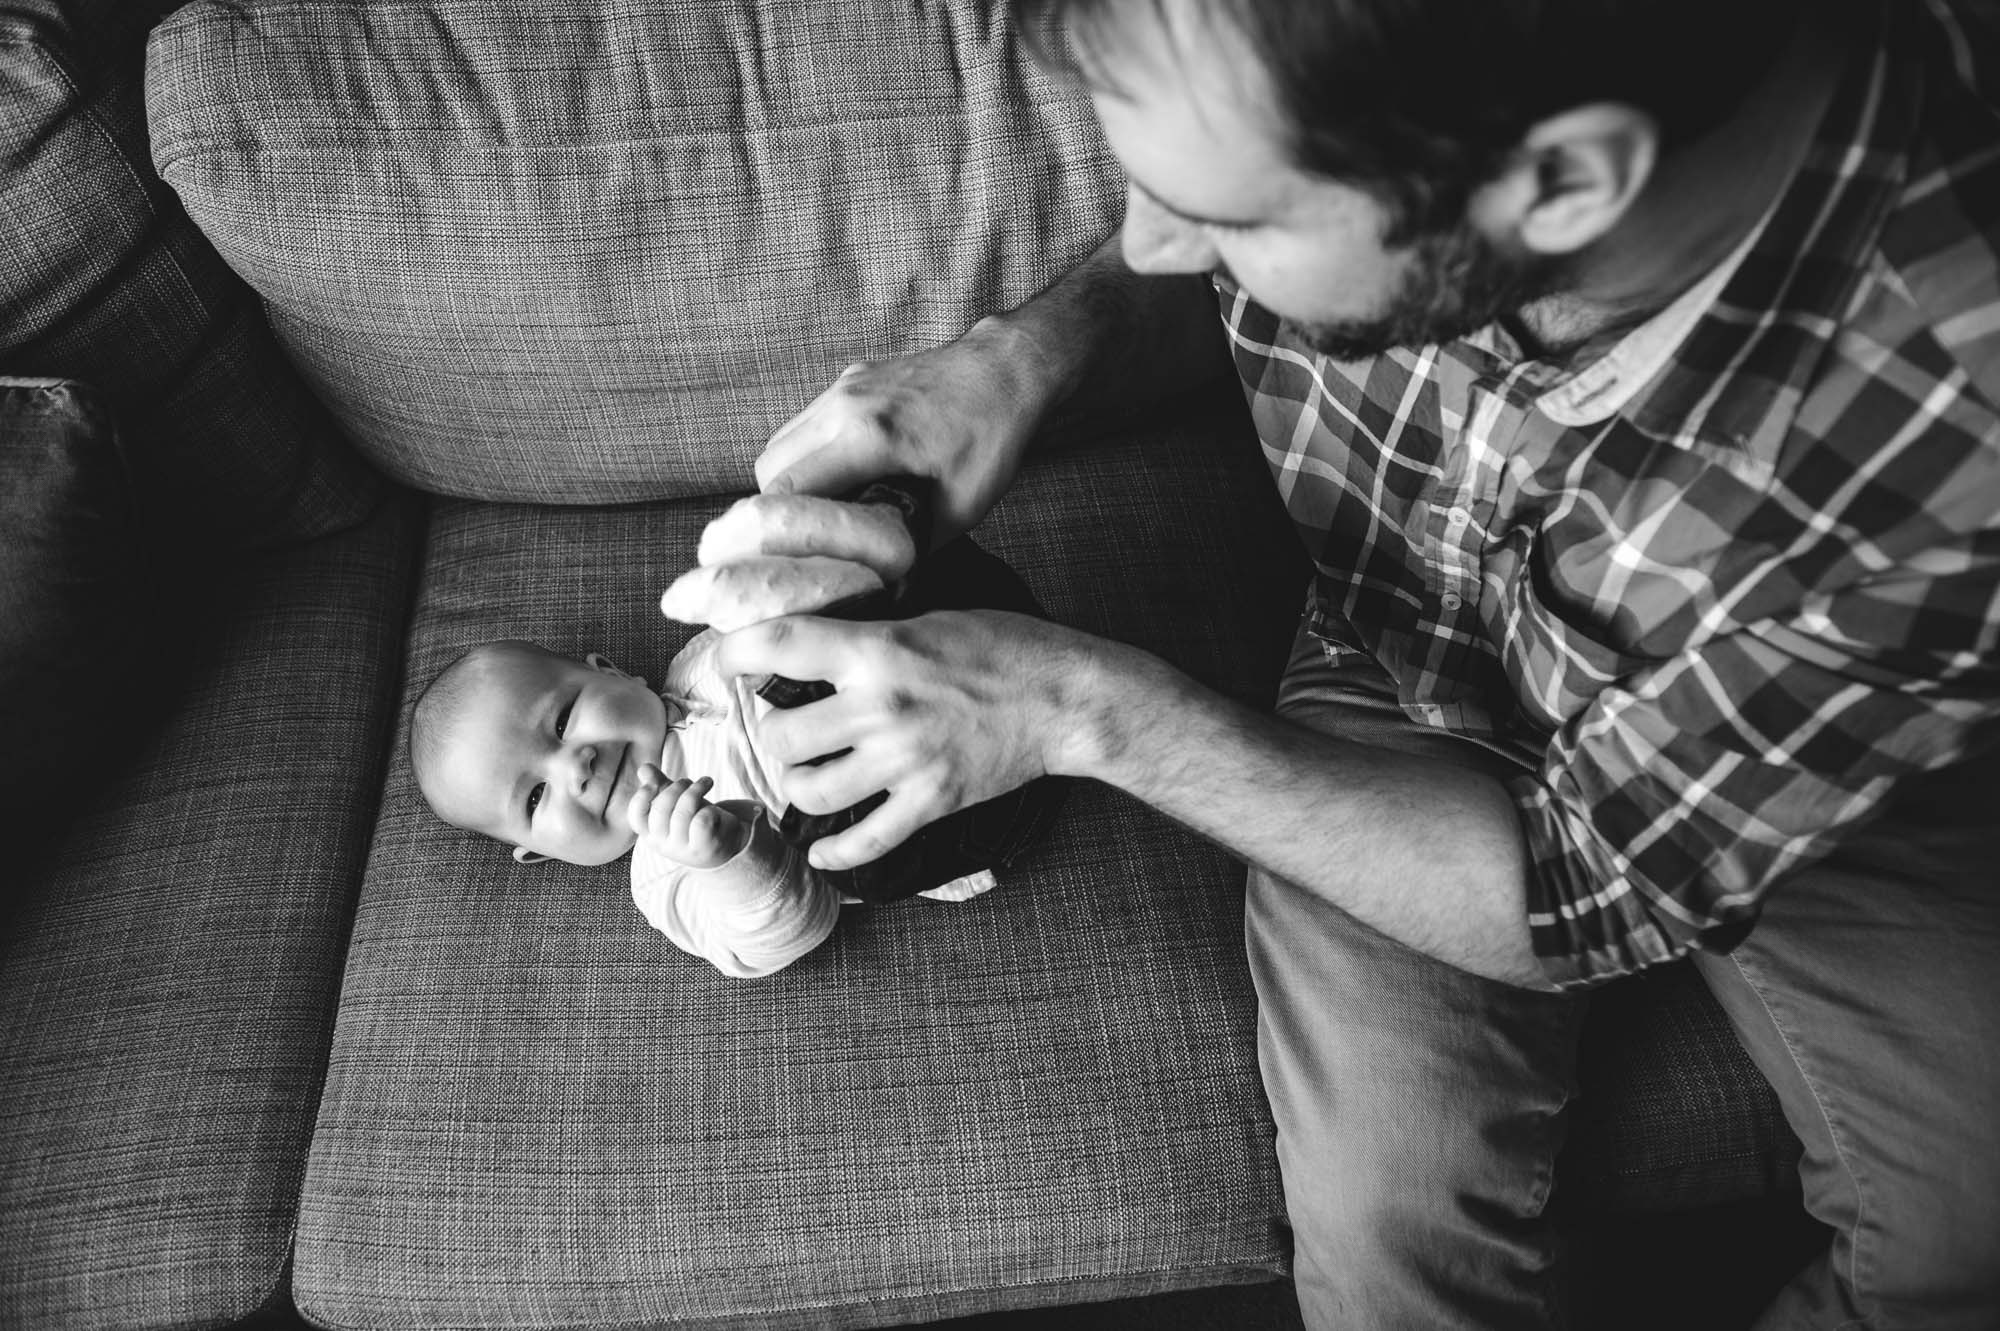 A dad tickles his baby on an Ikea couch 